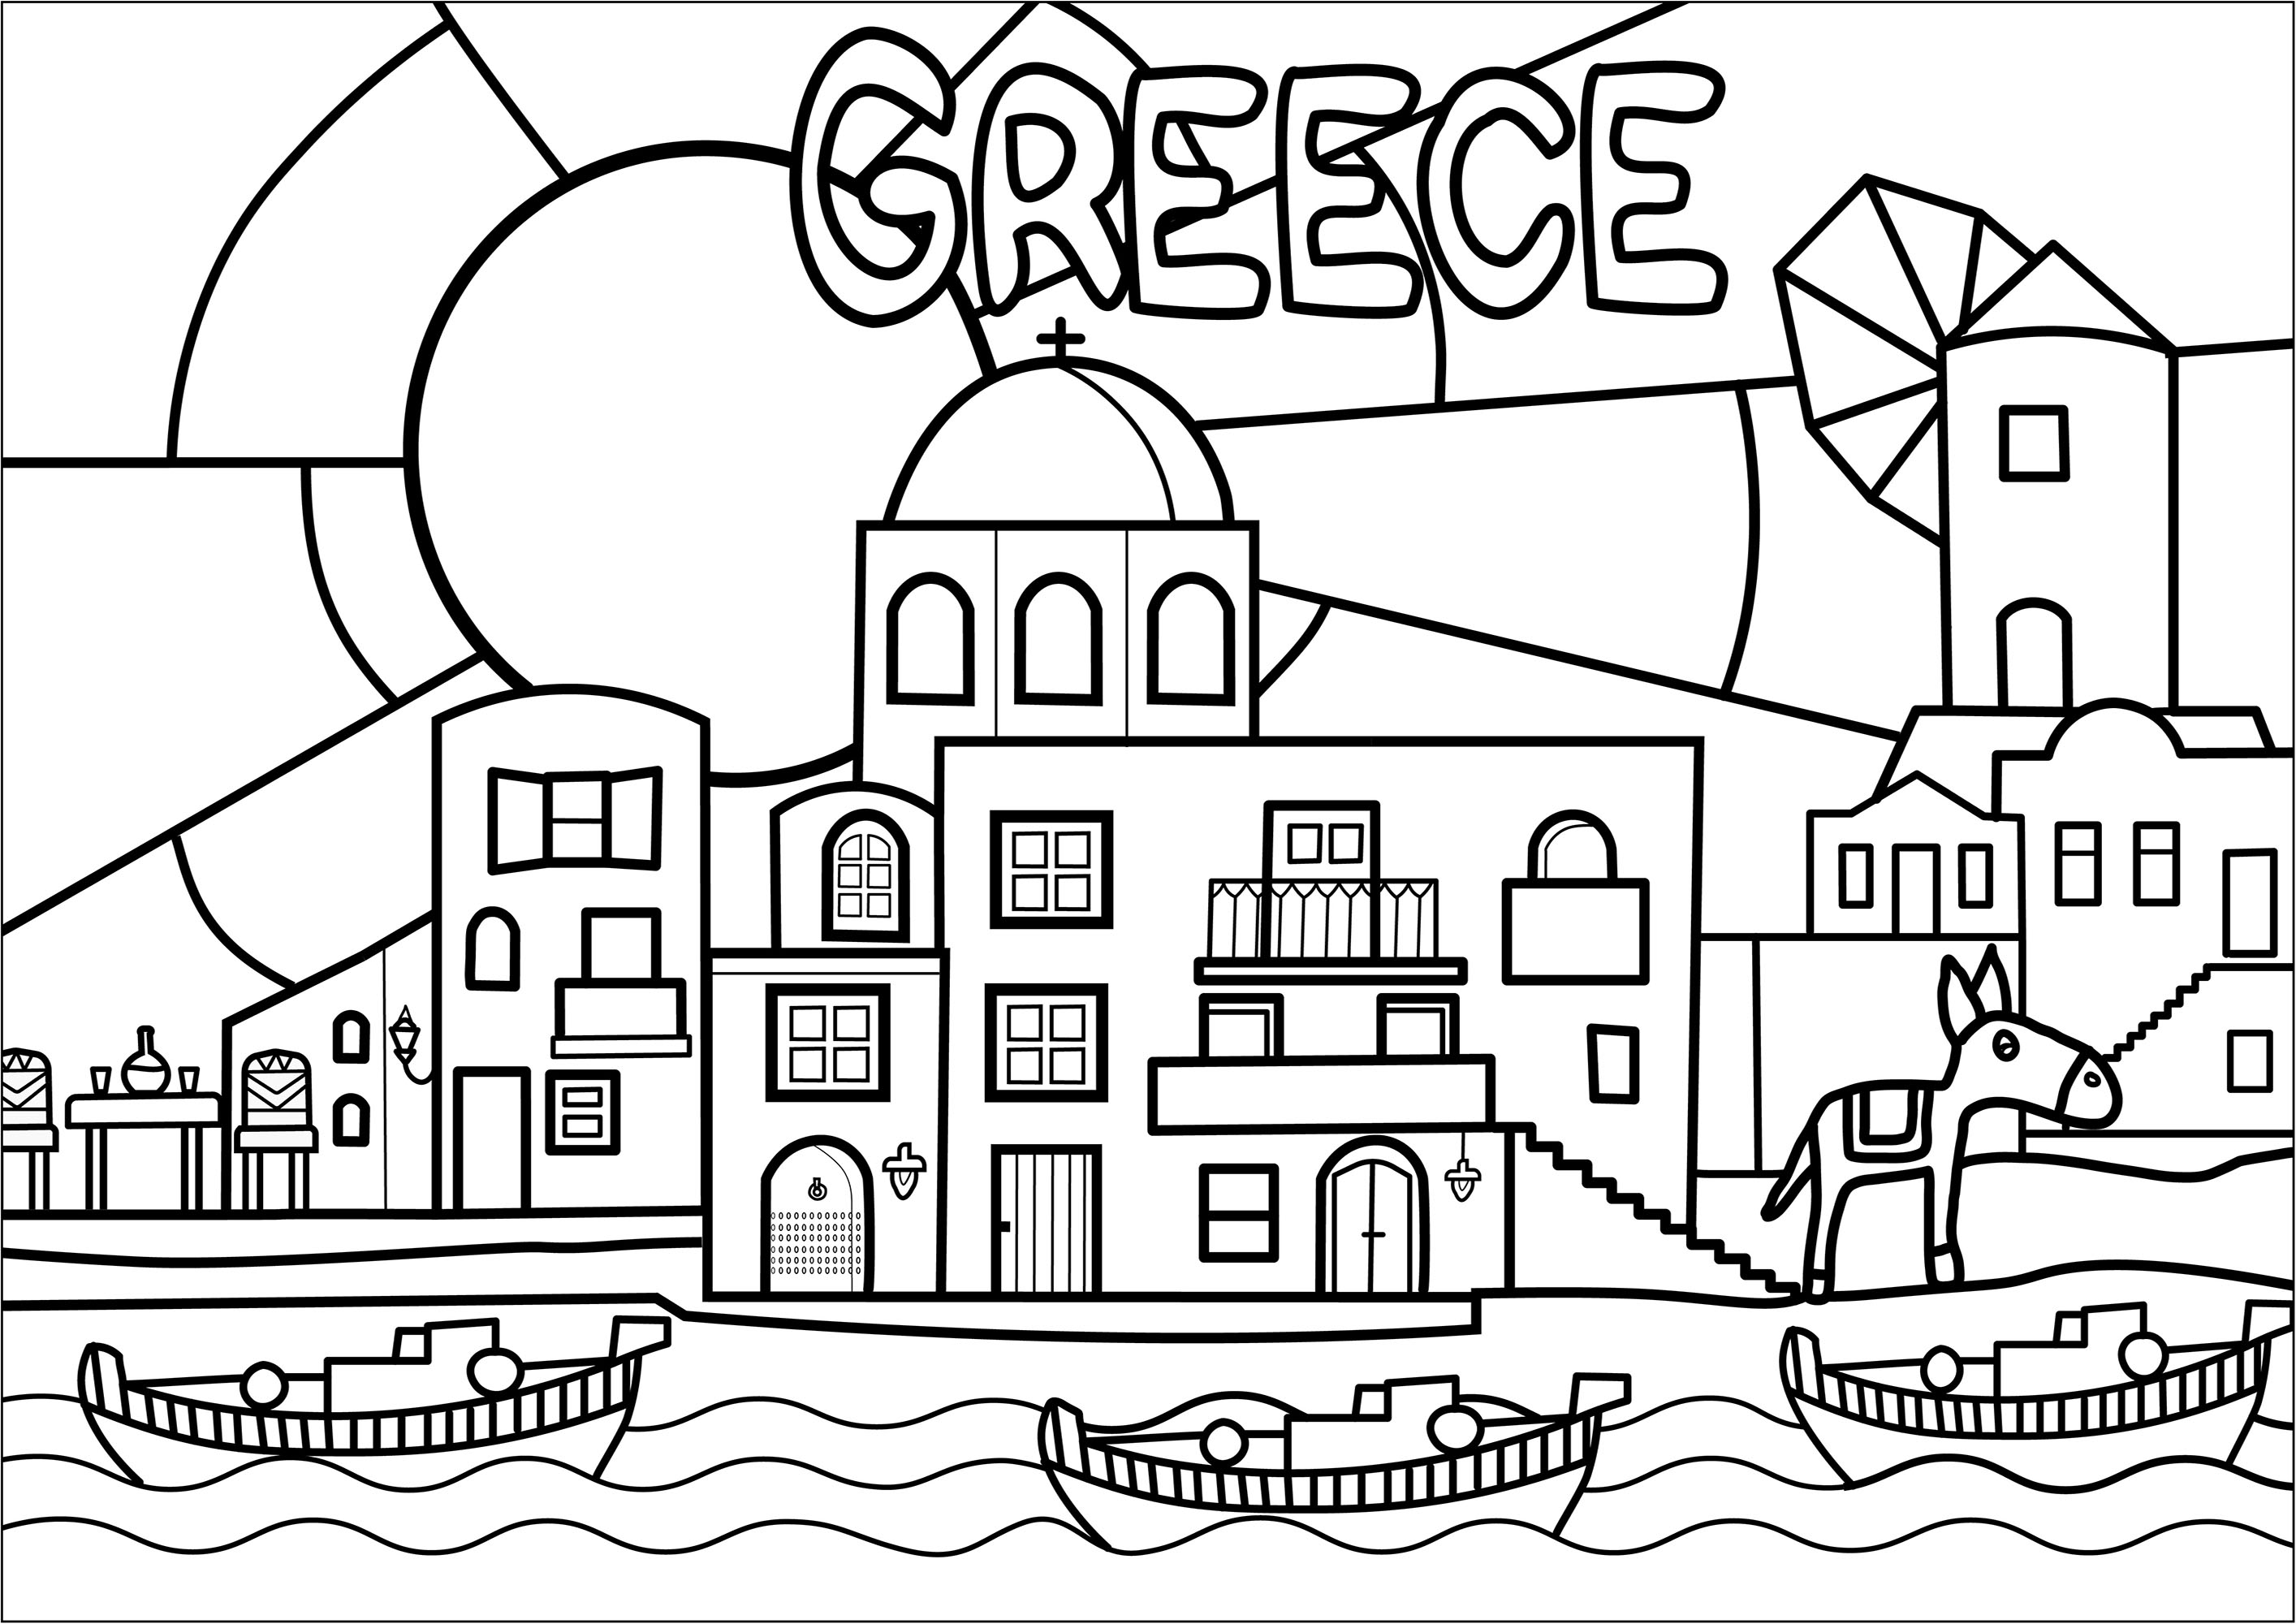 Pretty village in Greece, with typical architecture (simple version), Artist : Morgan